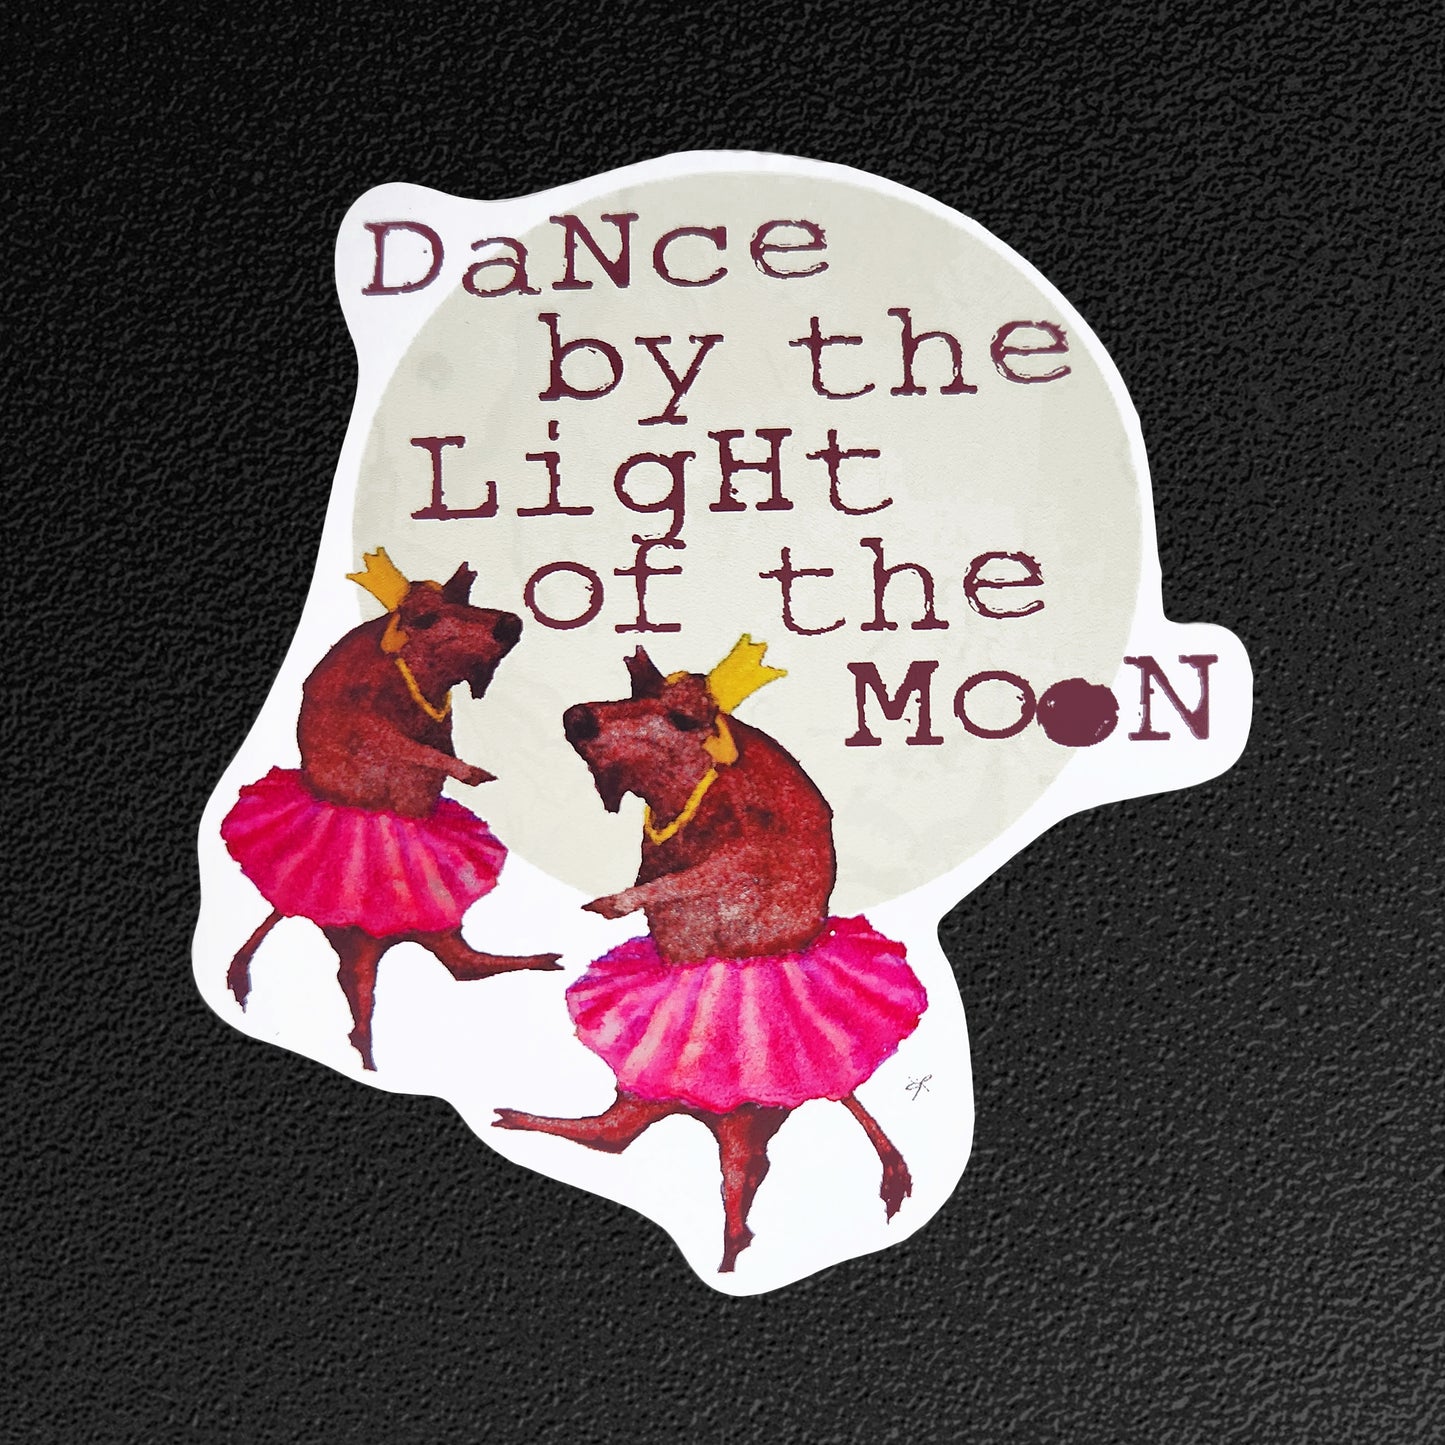 Dance by the Light of the Moon Vinyl Sticker/Decal